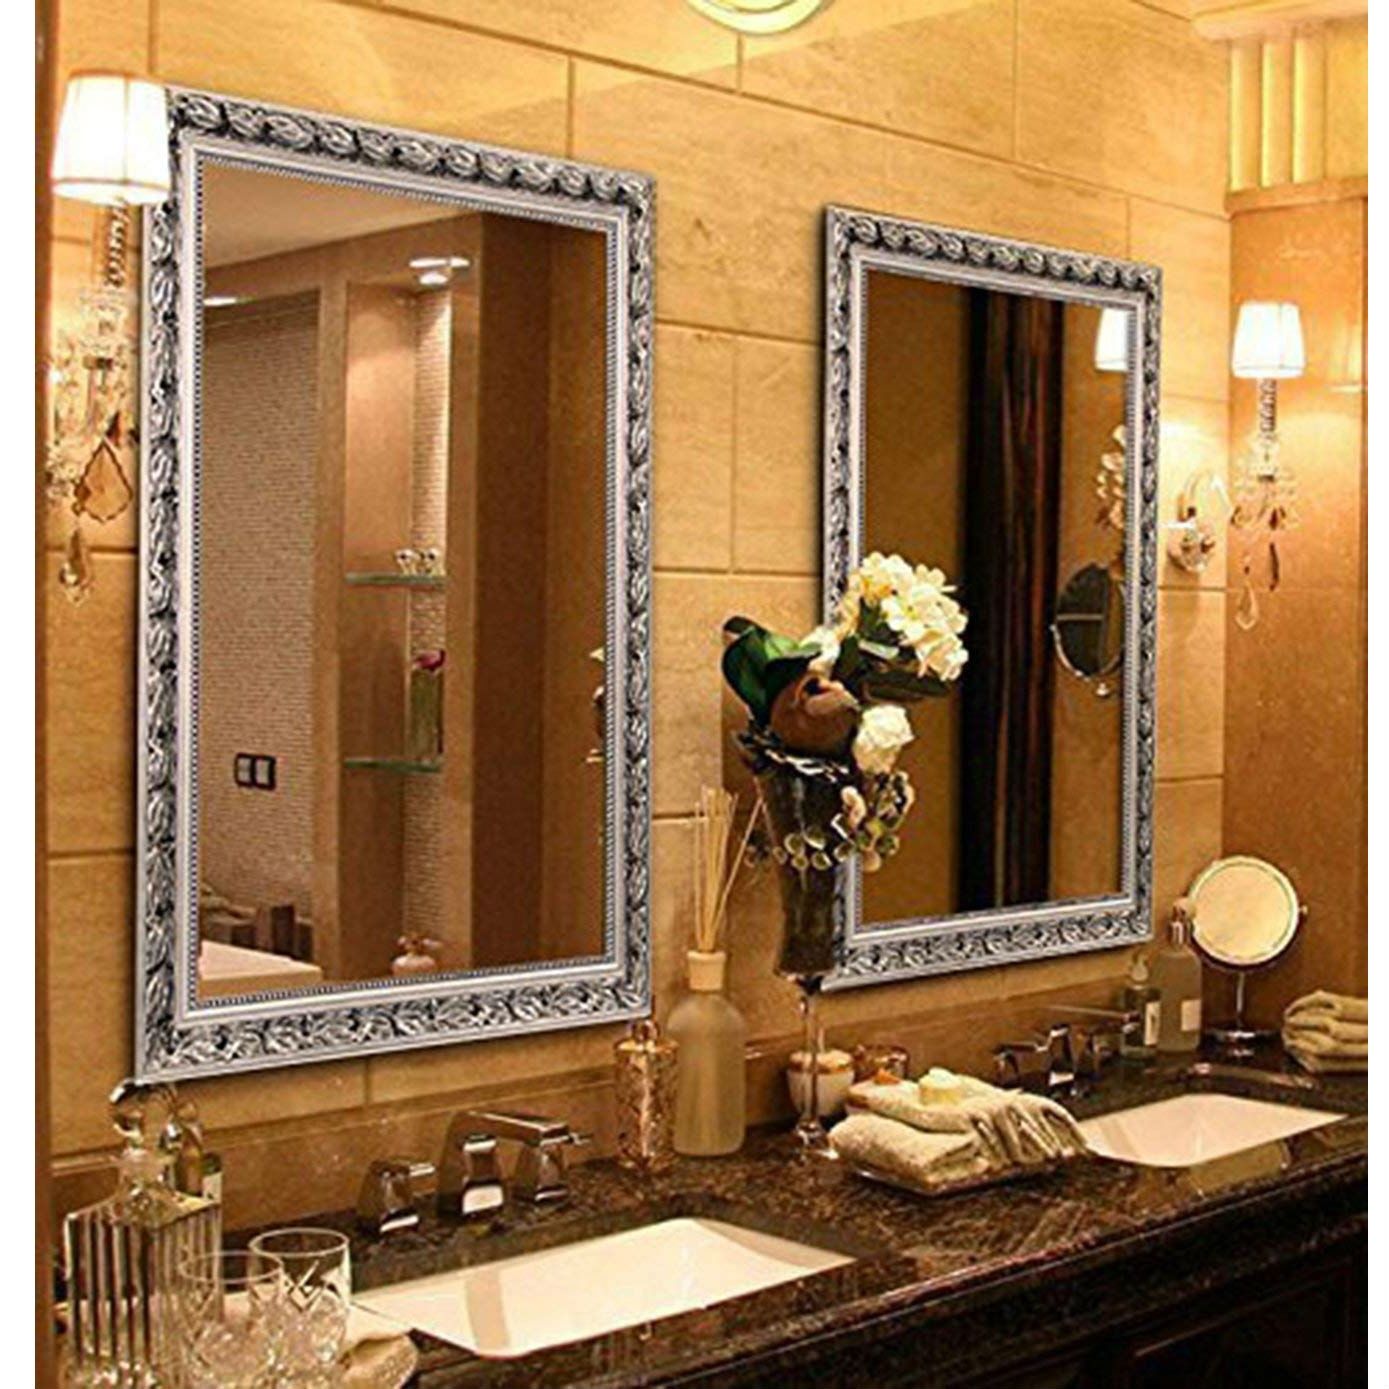 Large 38 X 26 Inch Bathroom Wall Mirror With Baroque Style Silver Wood In Wall Mirrors (View 9 of 15)